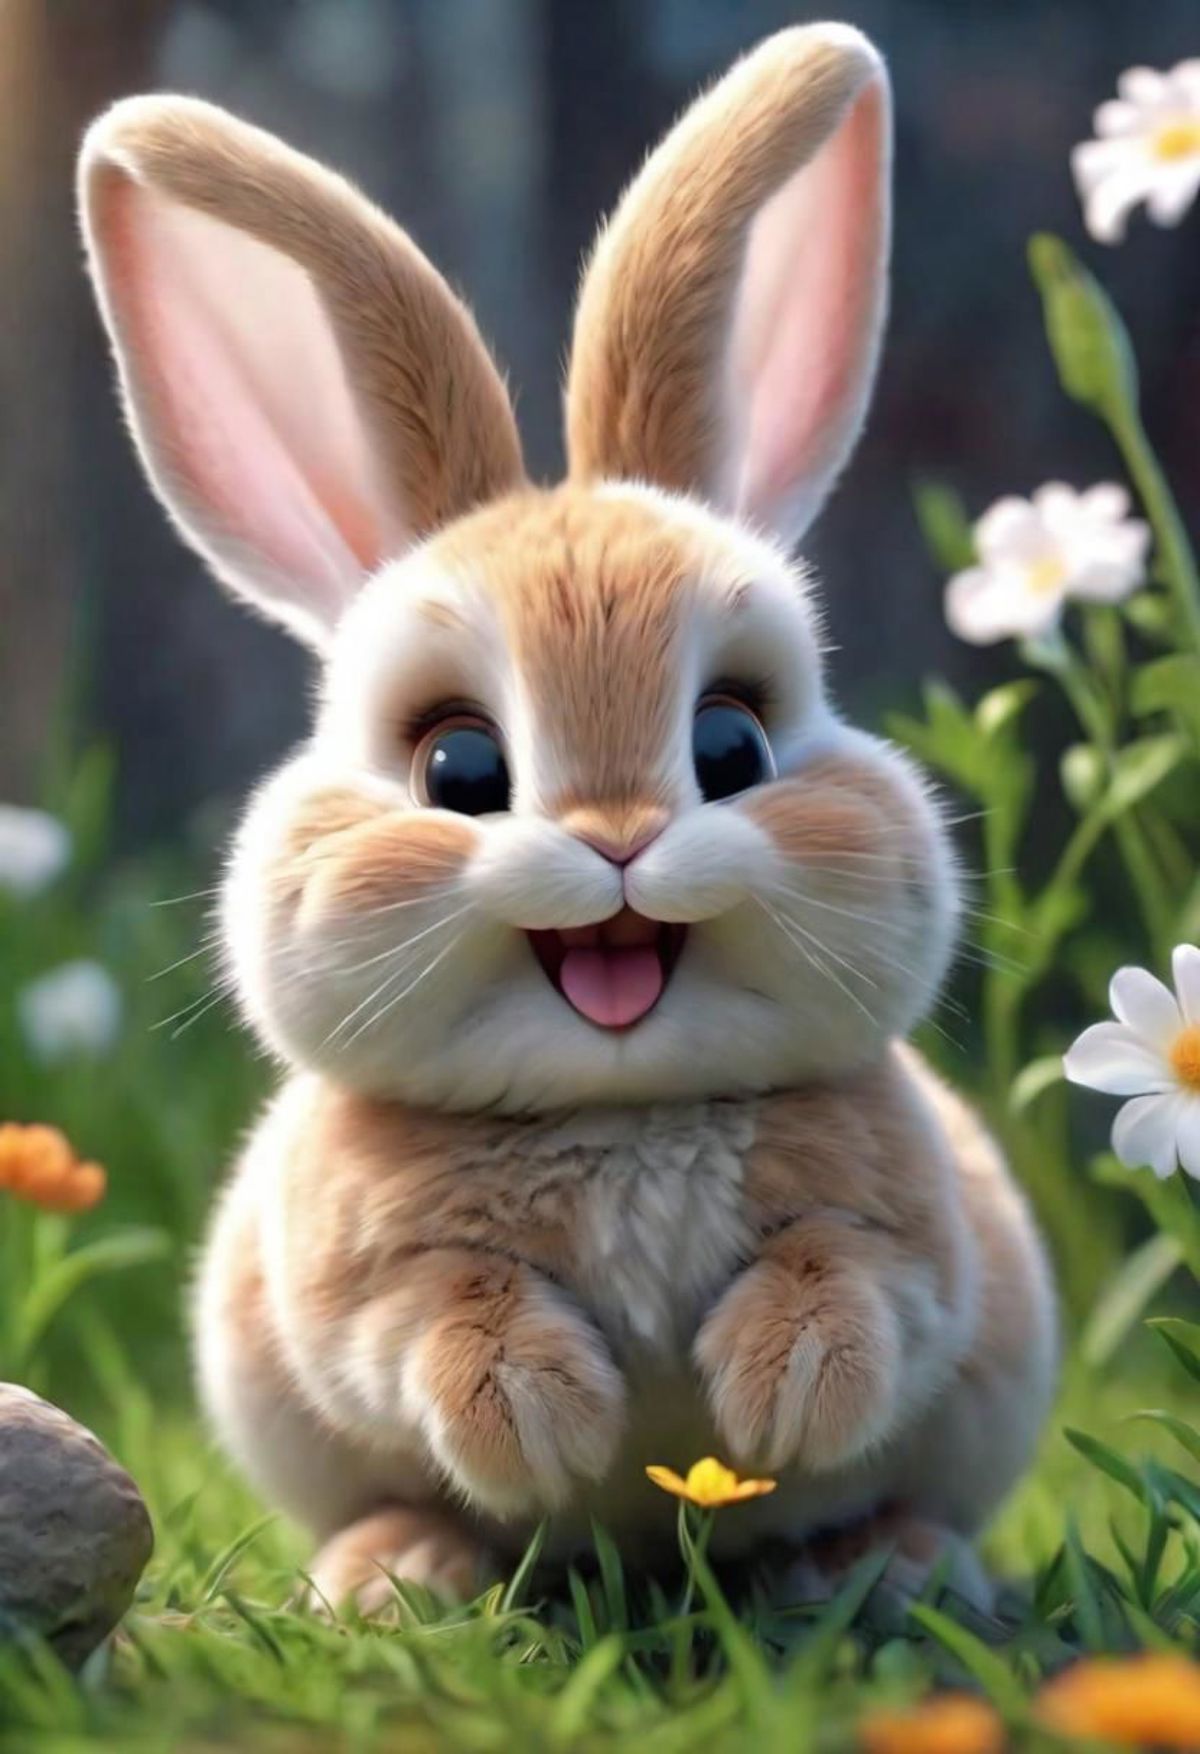 A cartoon rabbit with big ears, blue eyes, and a big smile, standing in a field of flowers.